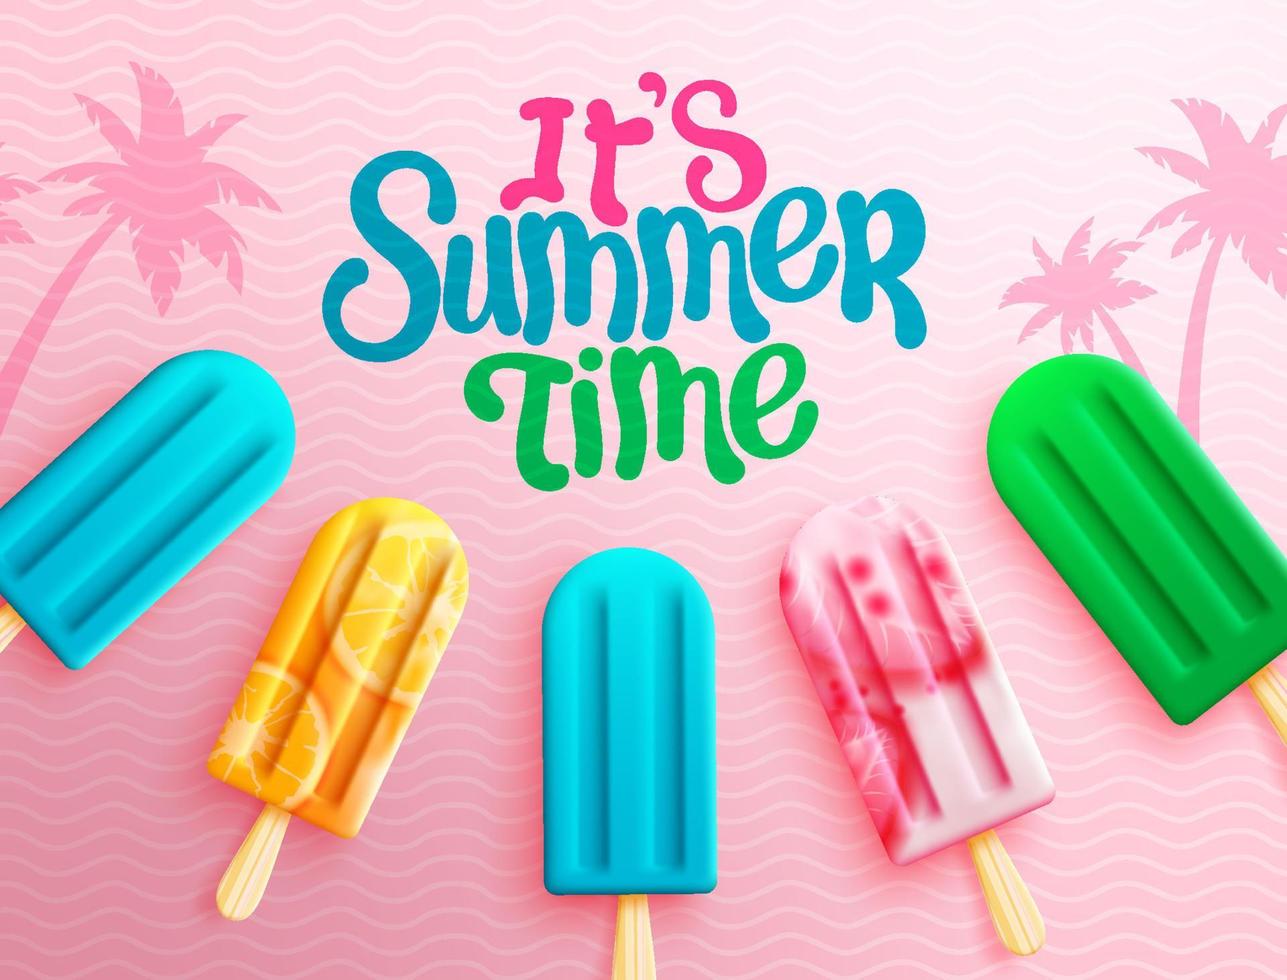 Summer popsicles vector background design. It's summer time text with fruits popsicle desserts in colorful sweet flavors for tropical season refreshment dessert. Vector illustration.